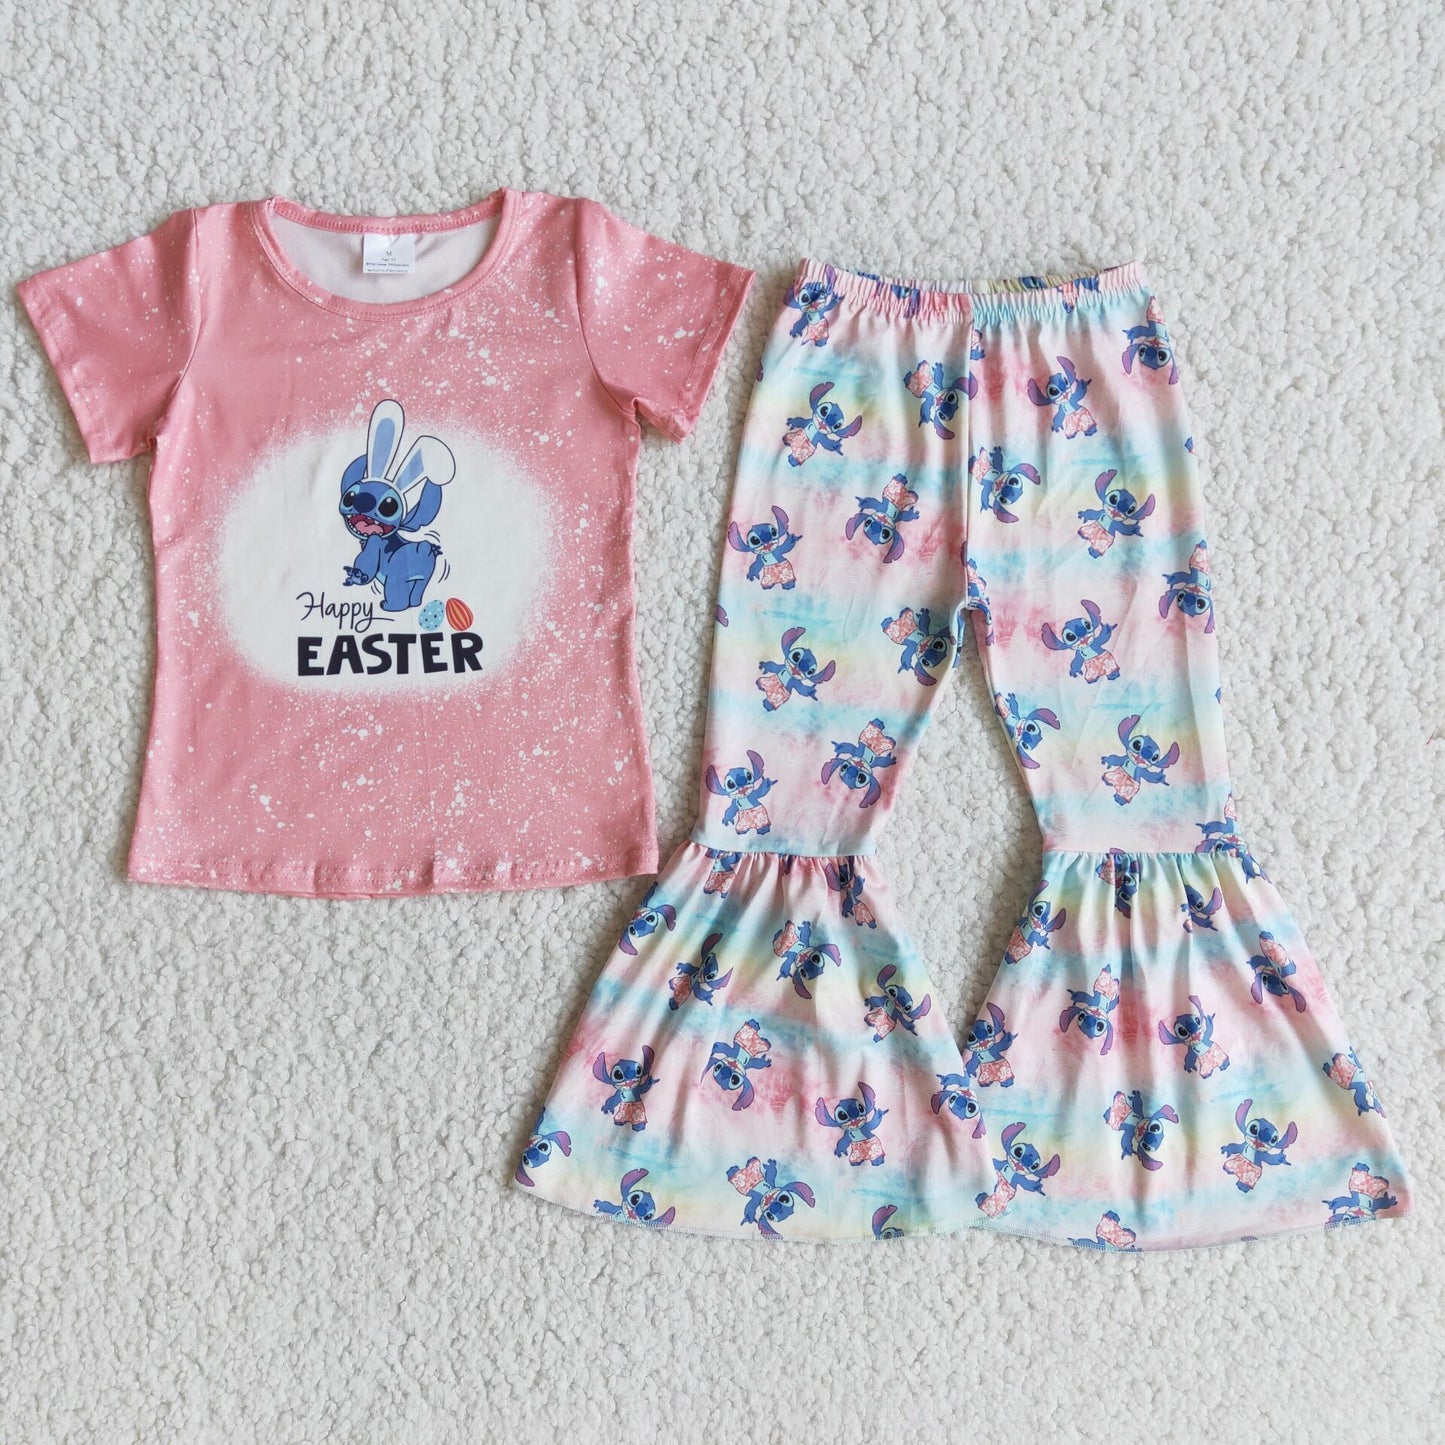 Happy Easter Cartoon outfit